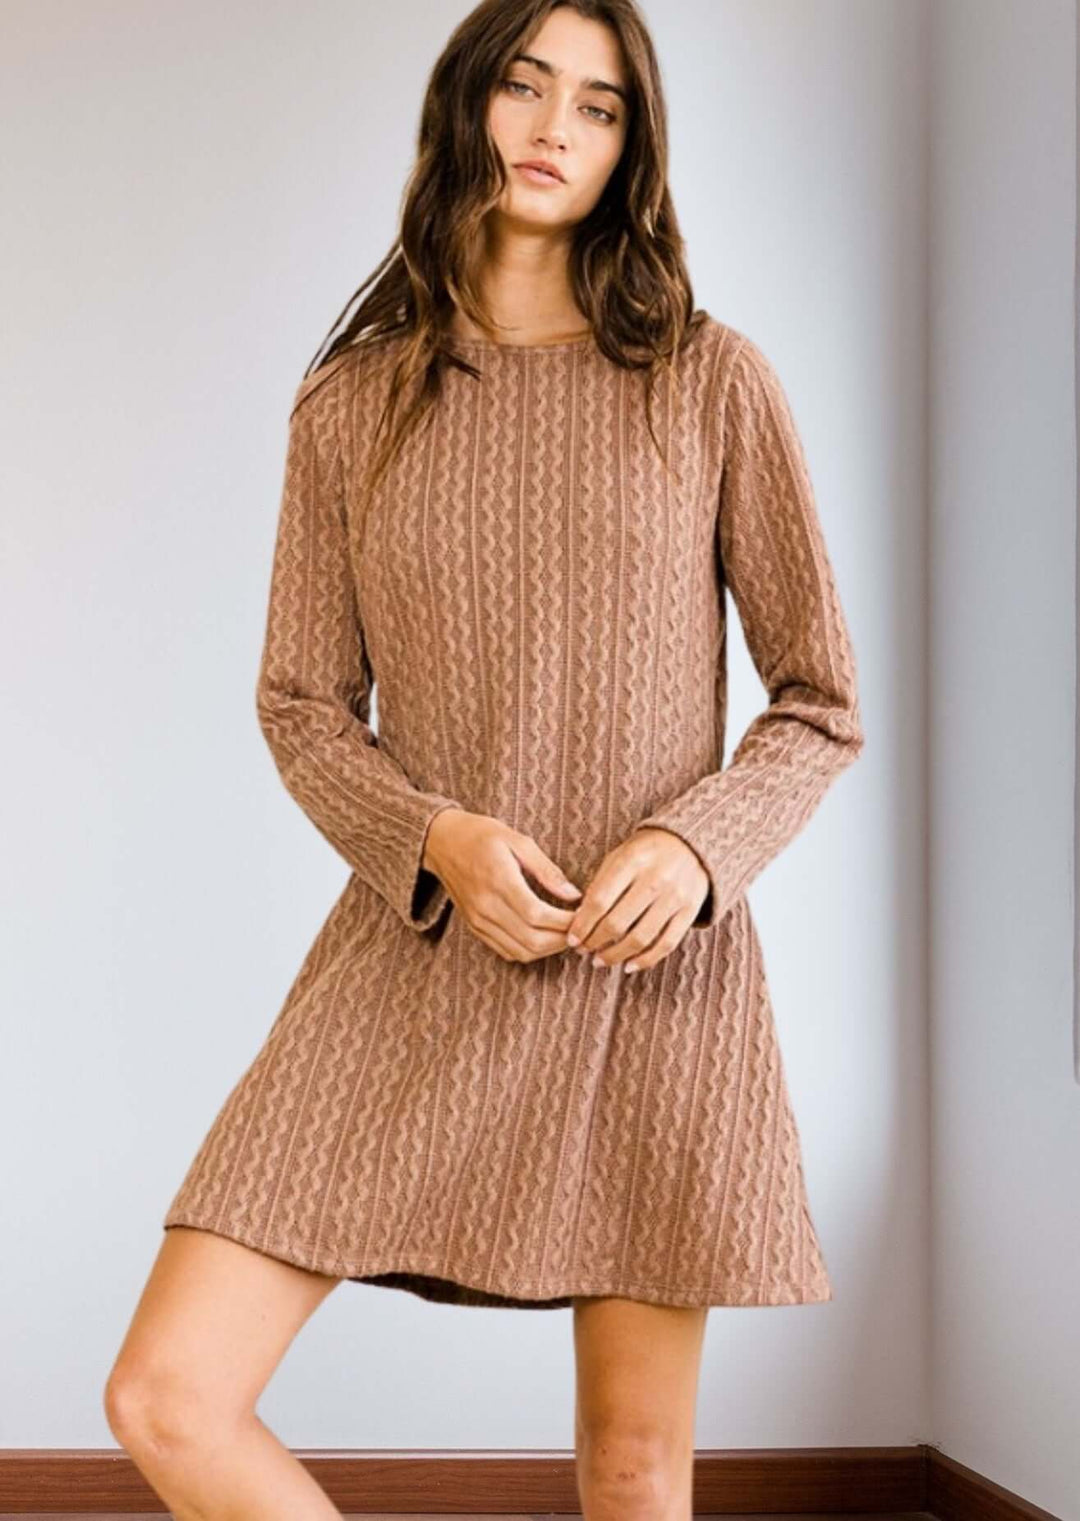 Bucket List Clothing Style# D4179 |  Women's Long Sleeve A-Line Sweater Tunic Dress in Camel | Classy Cozy Cool Women's Made in America Boutique